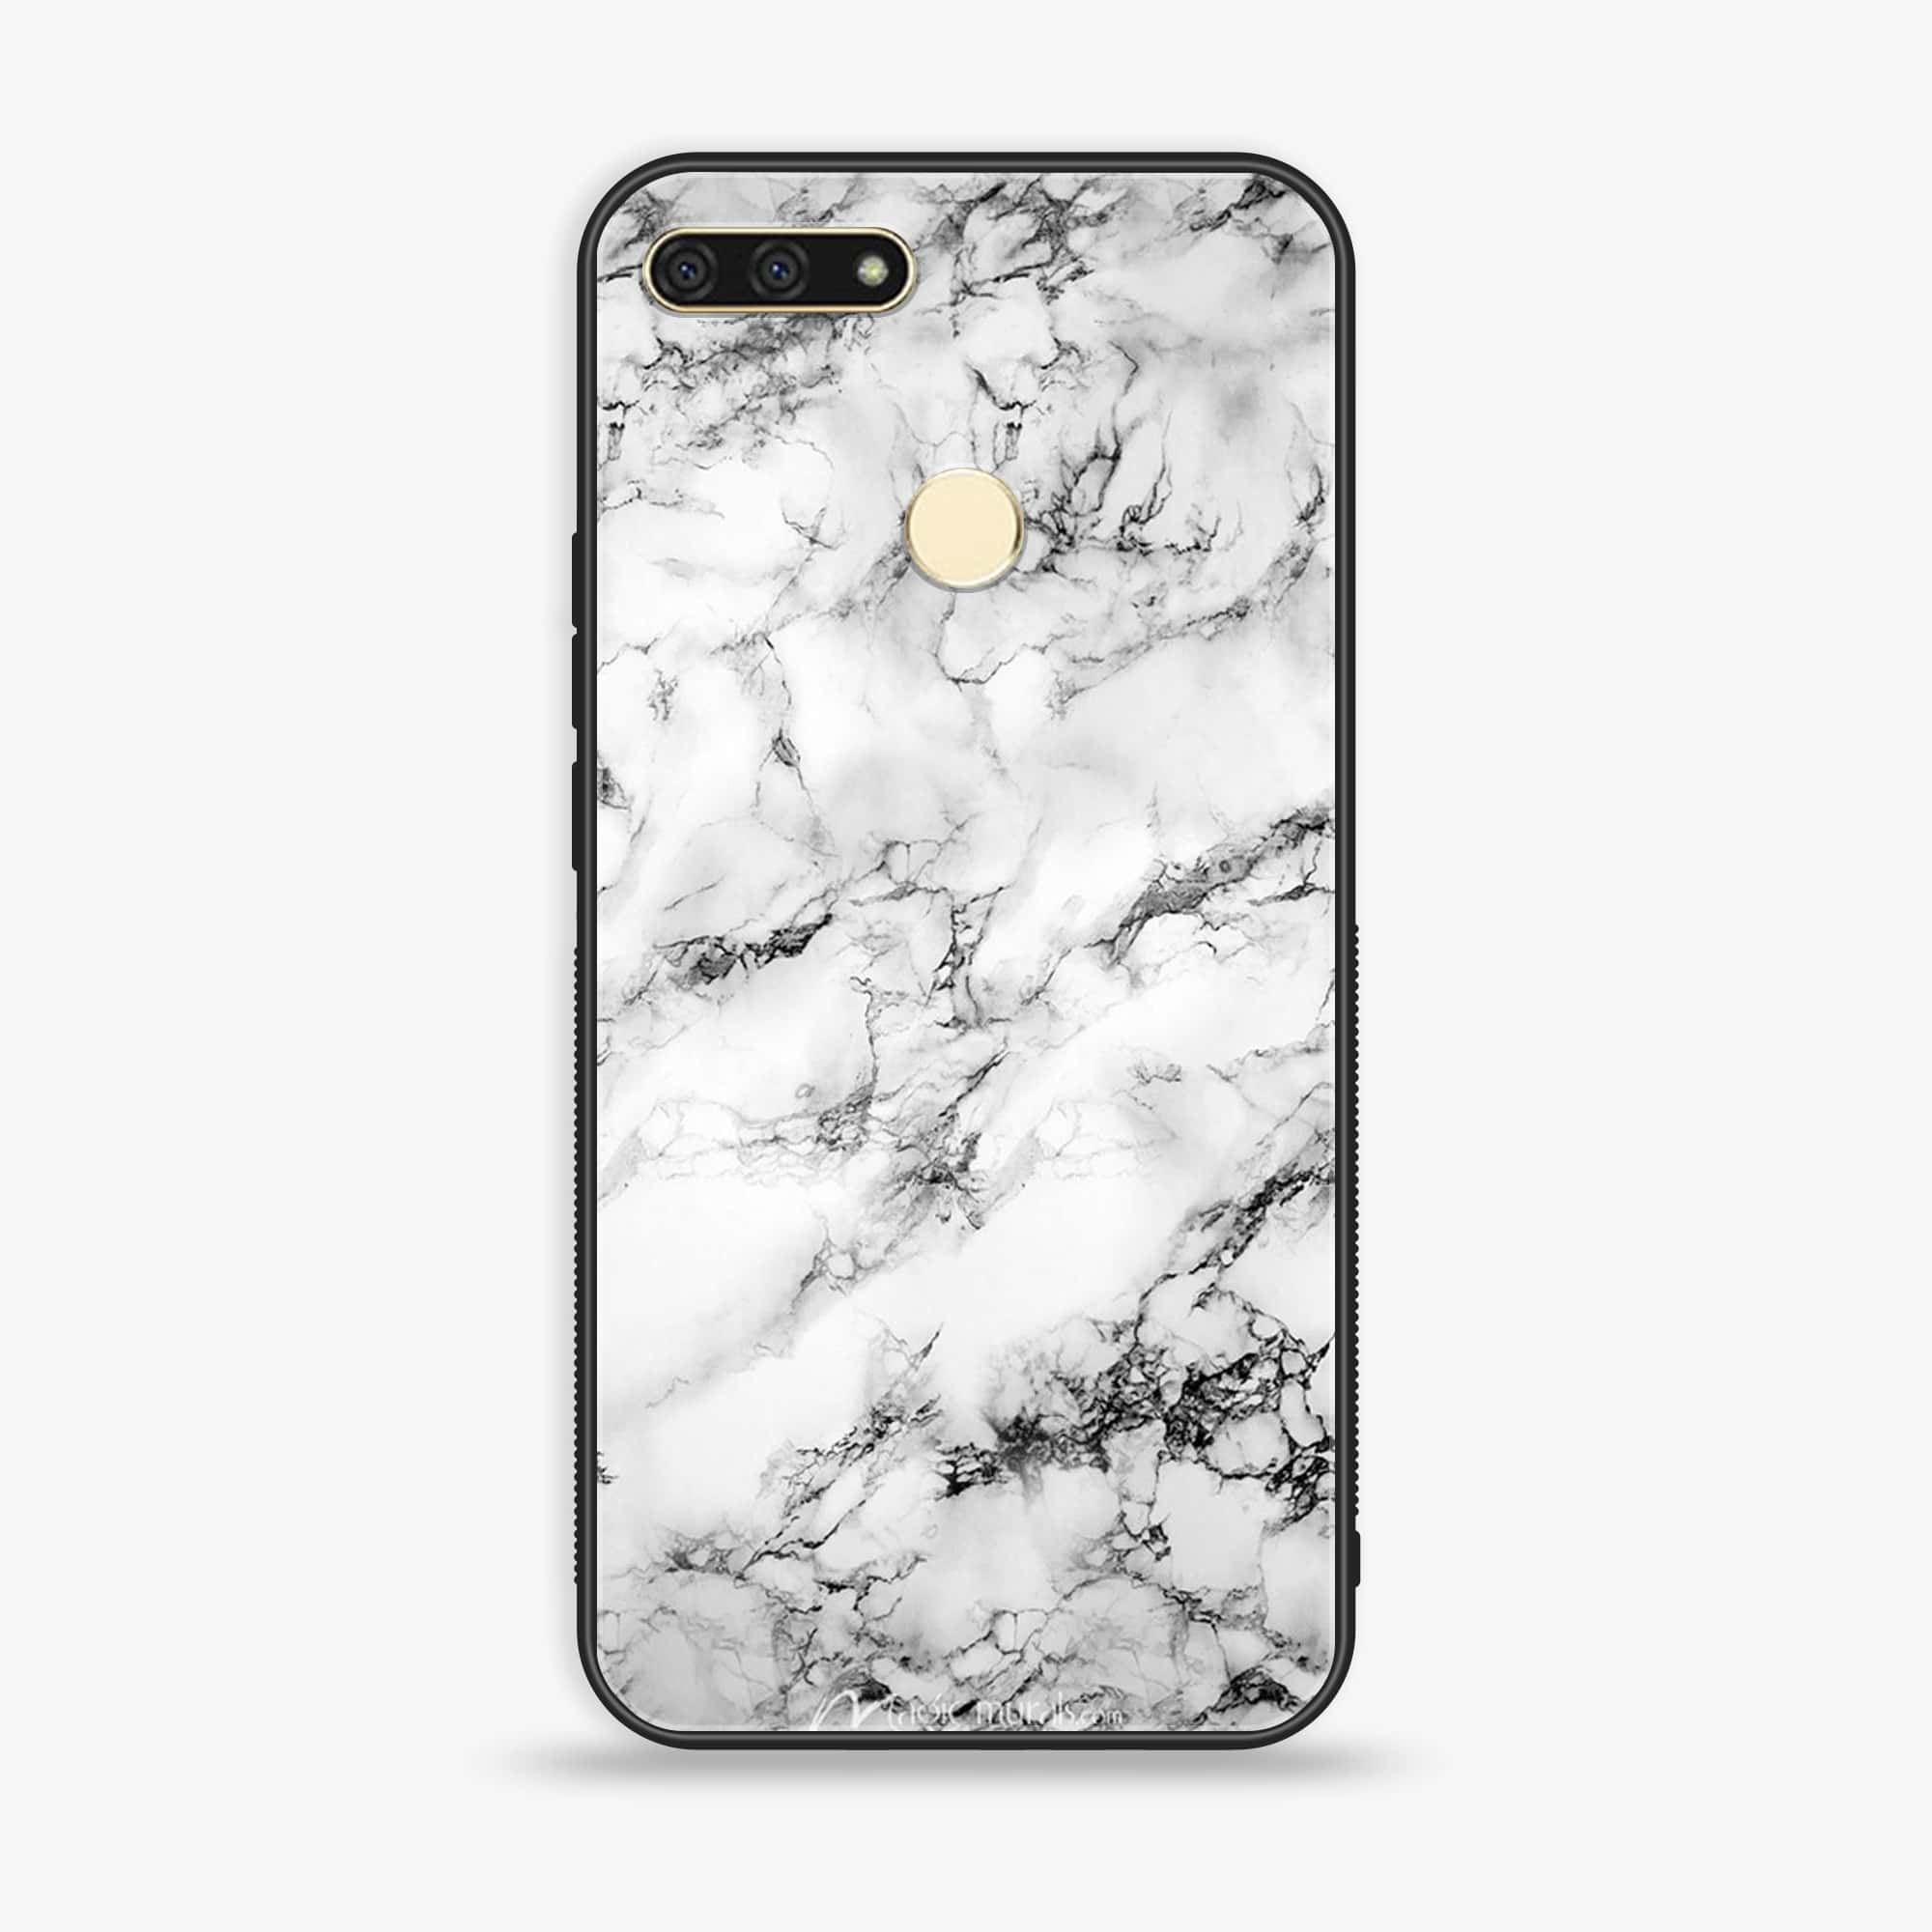 Honor 7A -  White Marble Series - Premium Printed Glass soft Bumper shock Proof Case